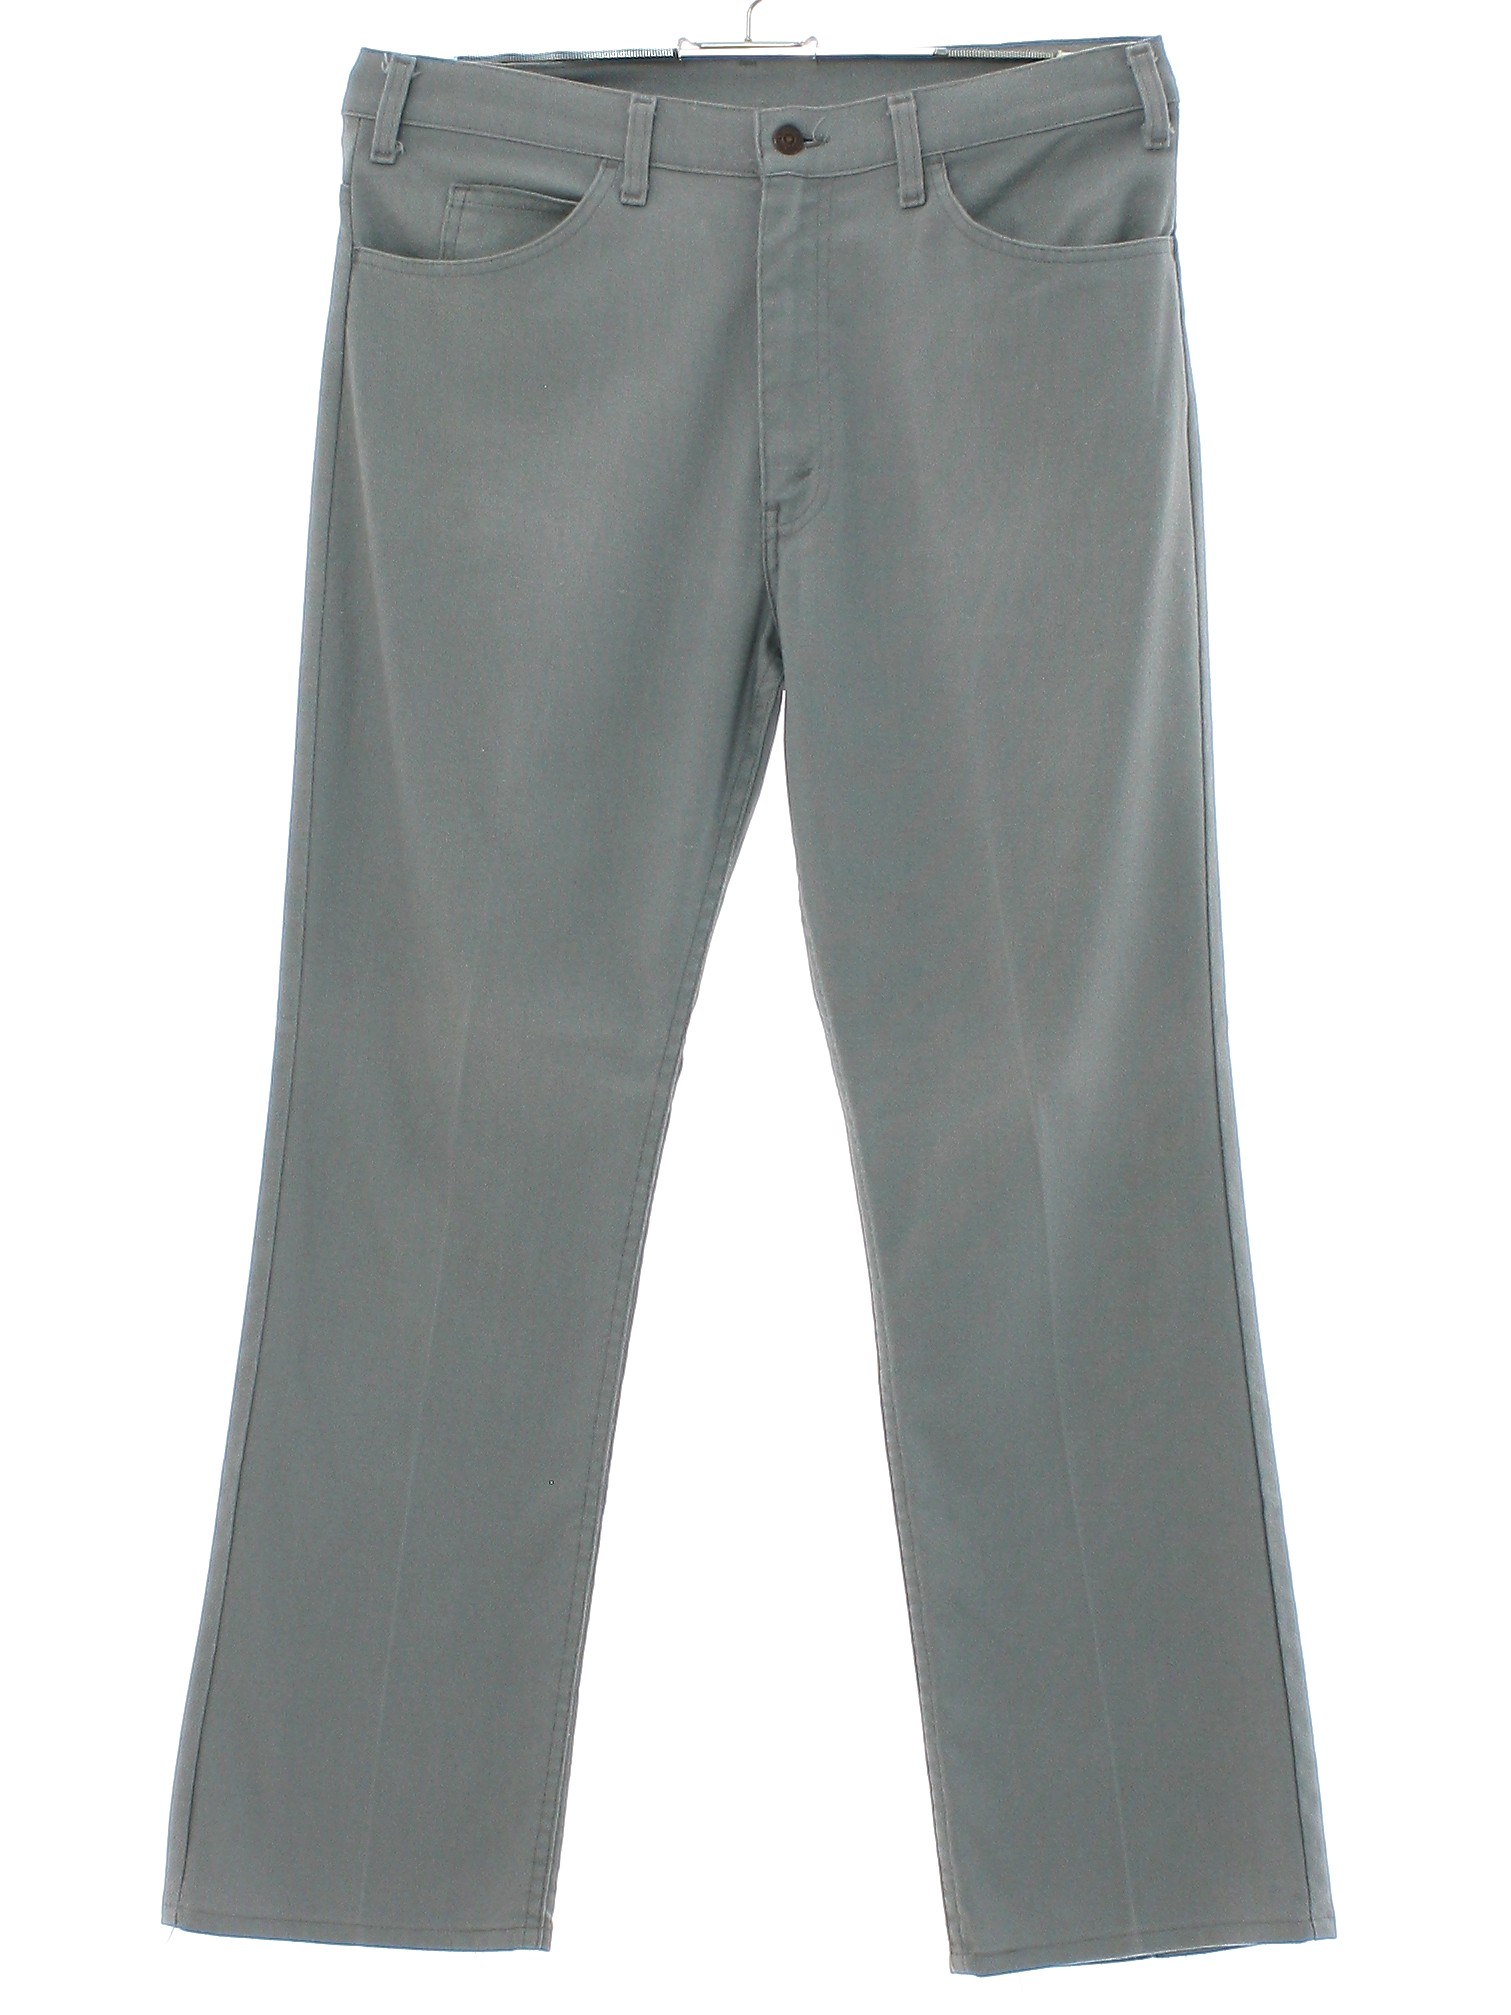 70s Vintage Levis Pants: 70s -Levis- Mens gray solid colored polyester ...